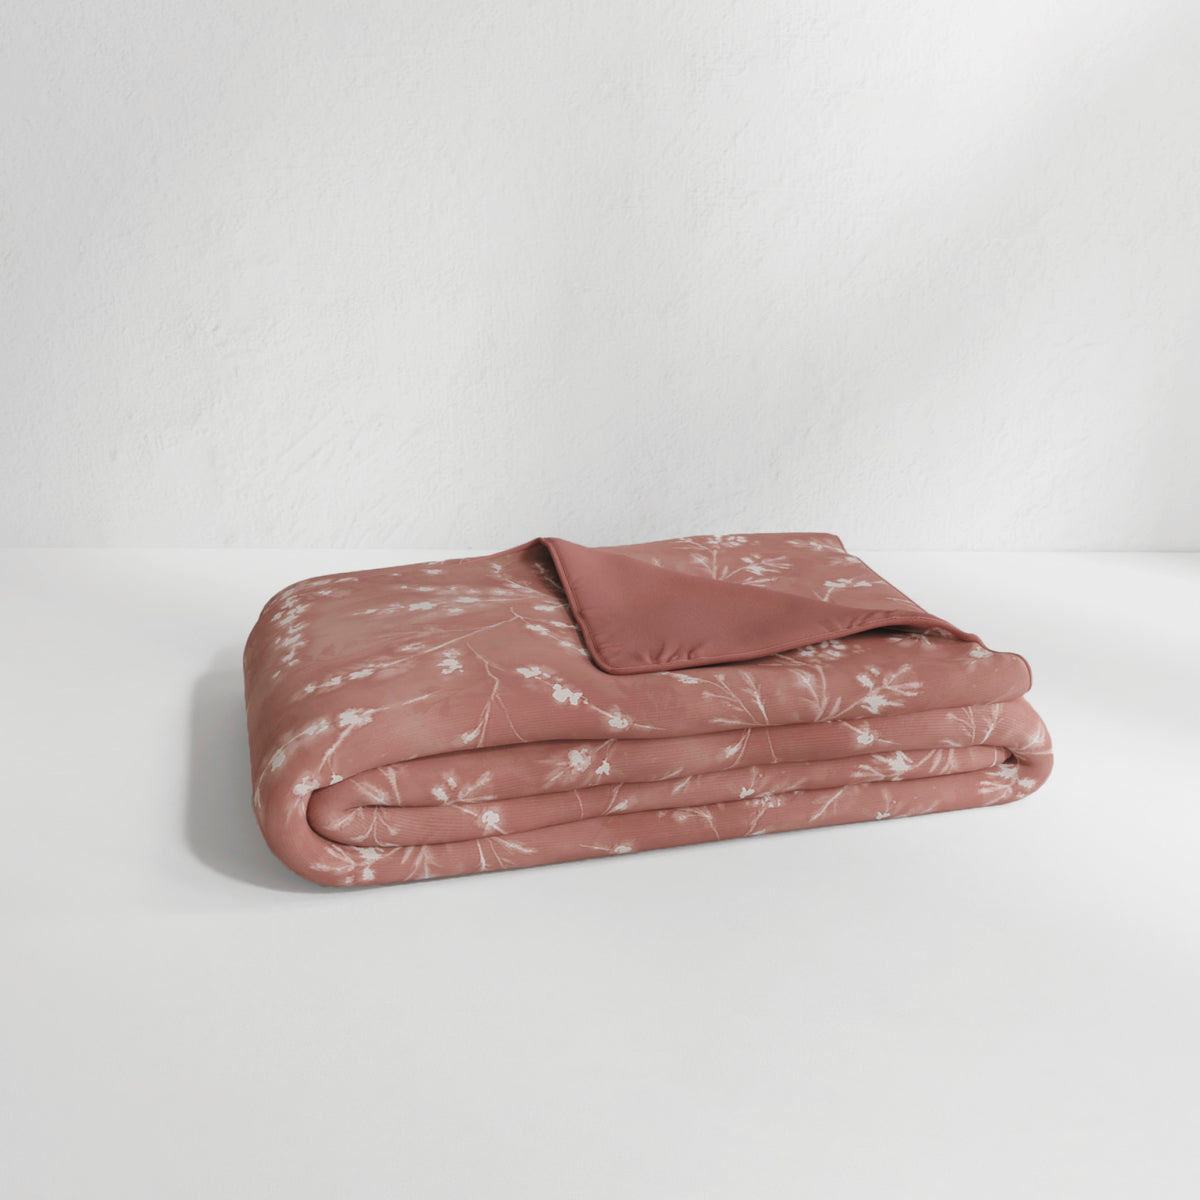 Image of the Floral Ash Rose Duvet Cover + Cooling neatly folded with the floral side facing up and the back right corner folded over to show the reversible plain Ash Rose side